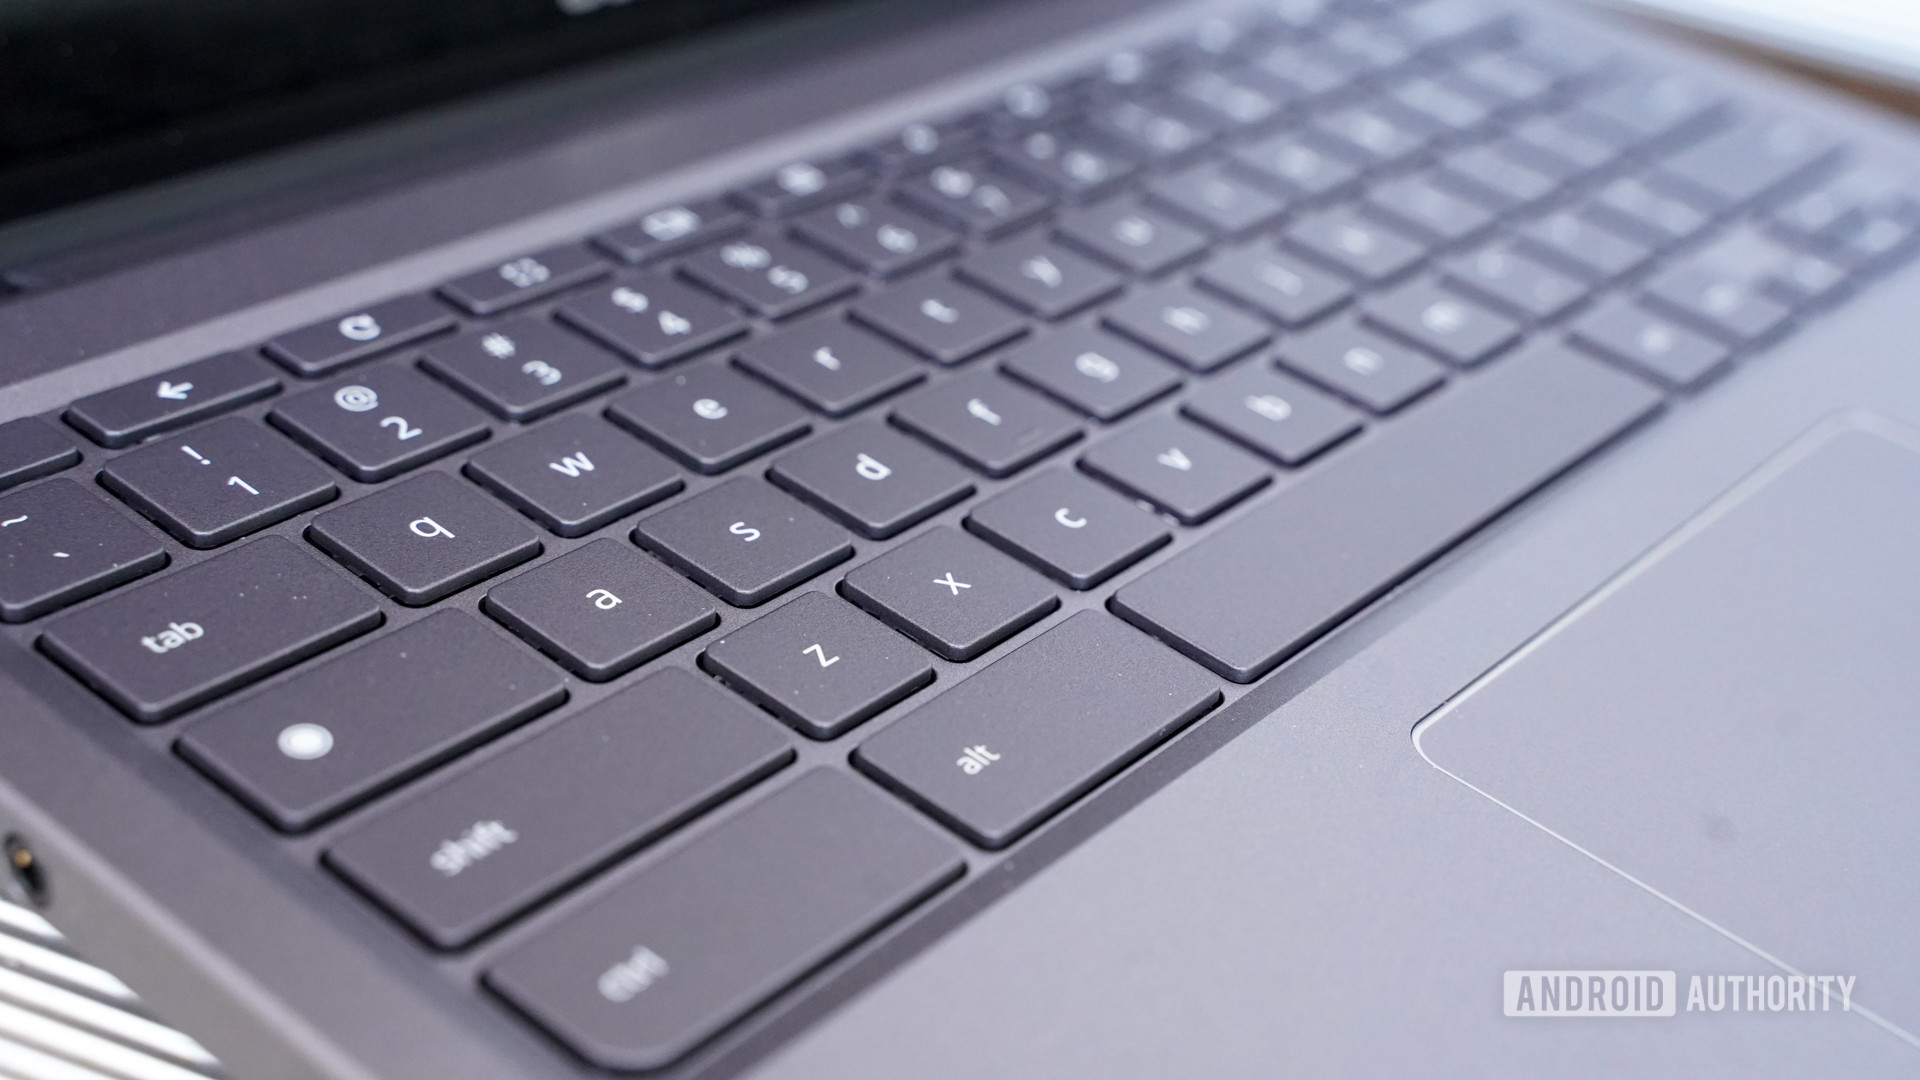 The Acer Chromebook Spin 713 keyboard close-up.